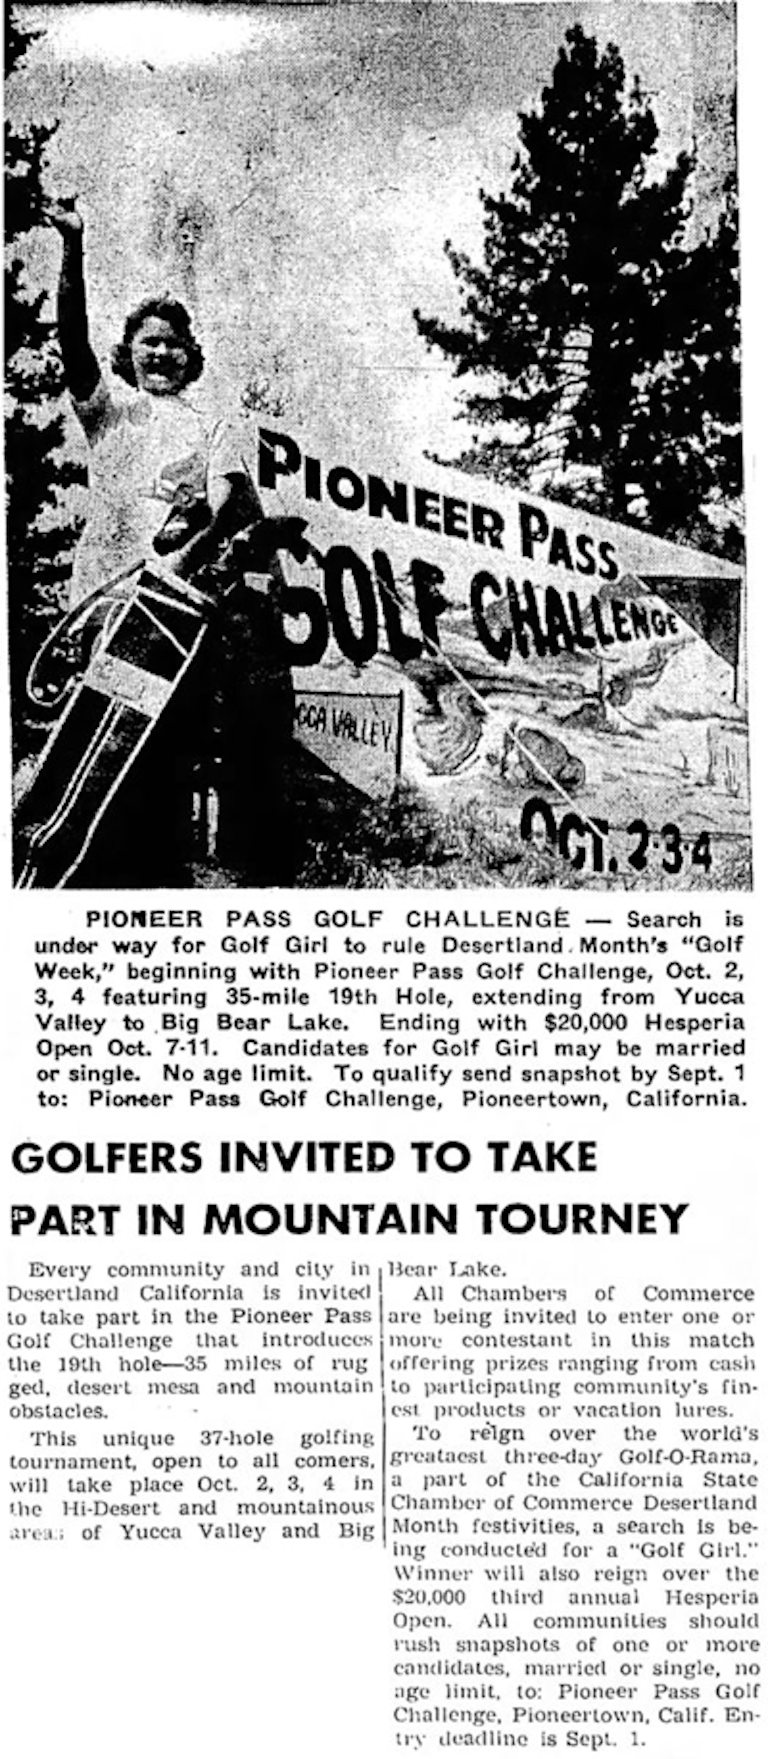 Aug. 20, 1959 - Desert Sentinel article clipping